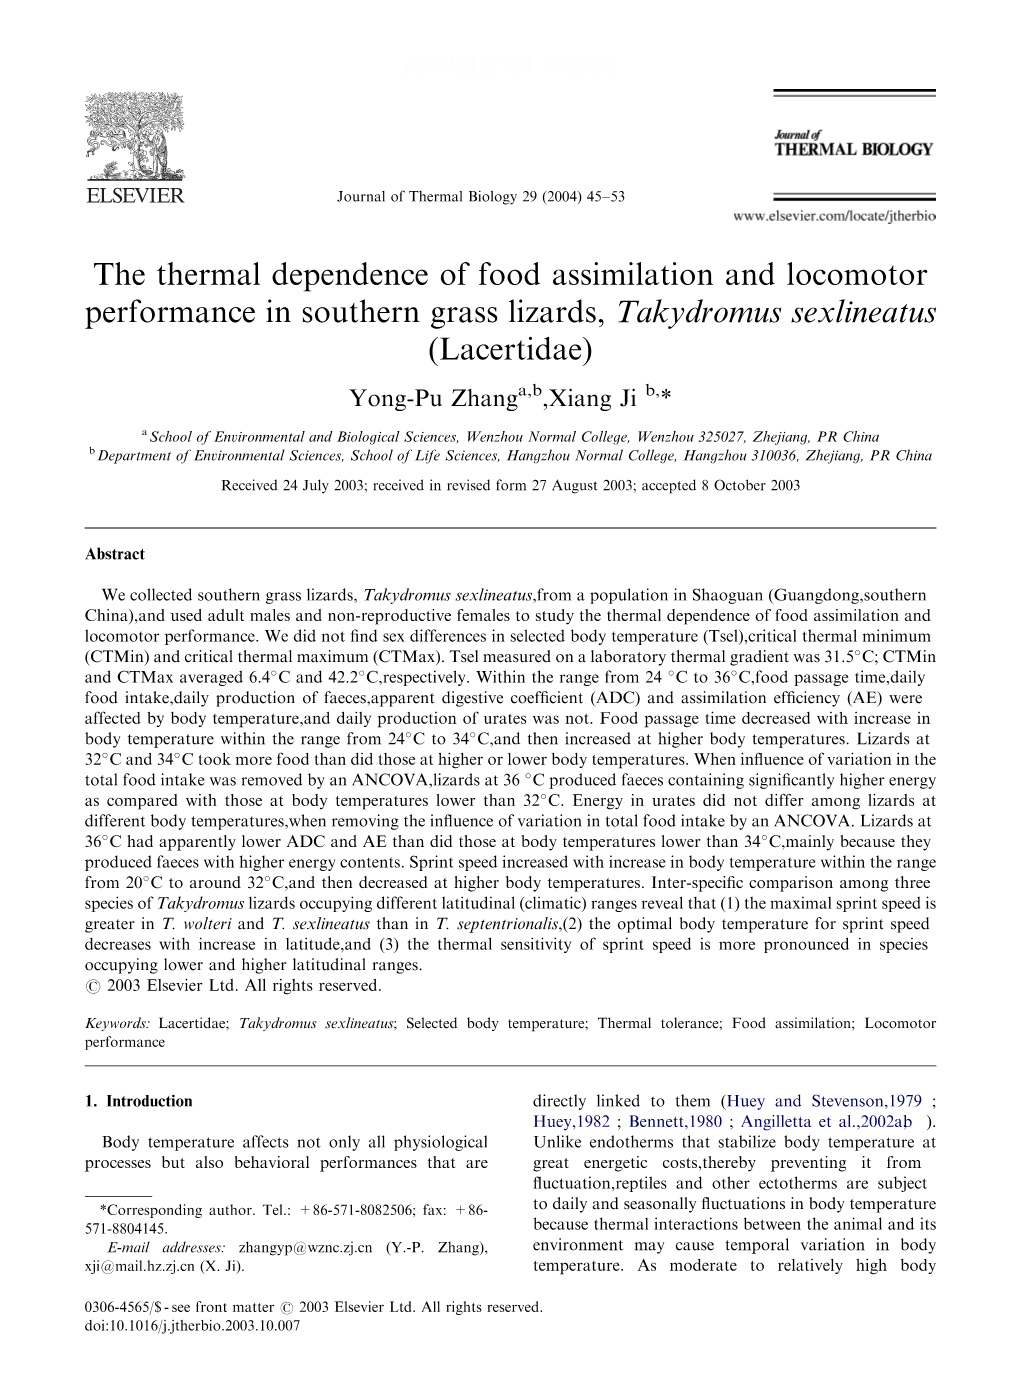 The Thermal Dependence of Food Assimilation and Locomotor Performance in Southern Grass Lizards, Takydromus Sexlineatus (Lacertidae) Yong-Pu Zhanga,B,Xiang Ji B,*